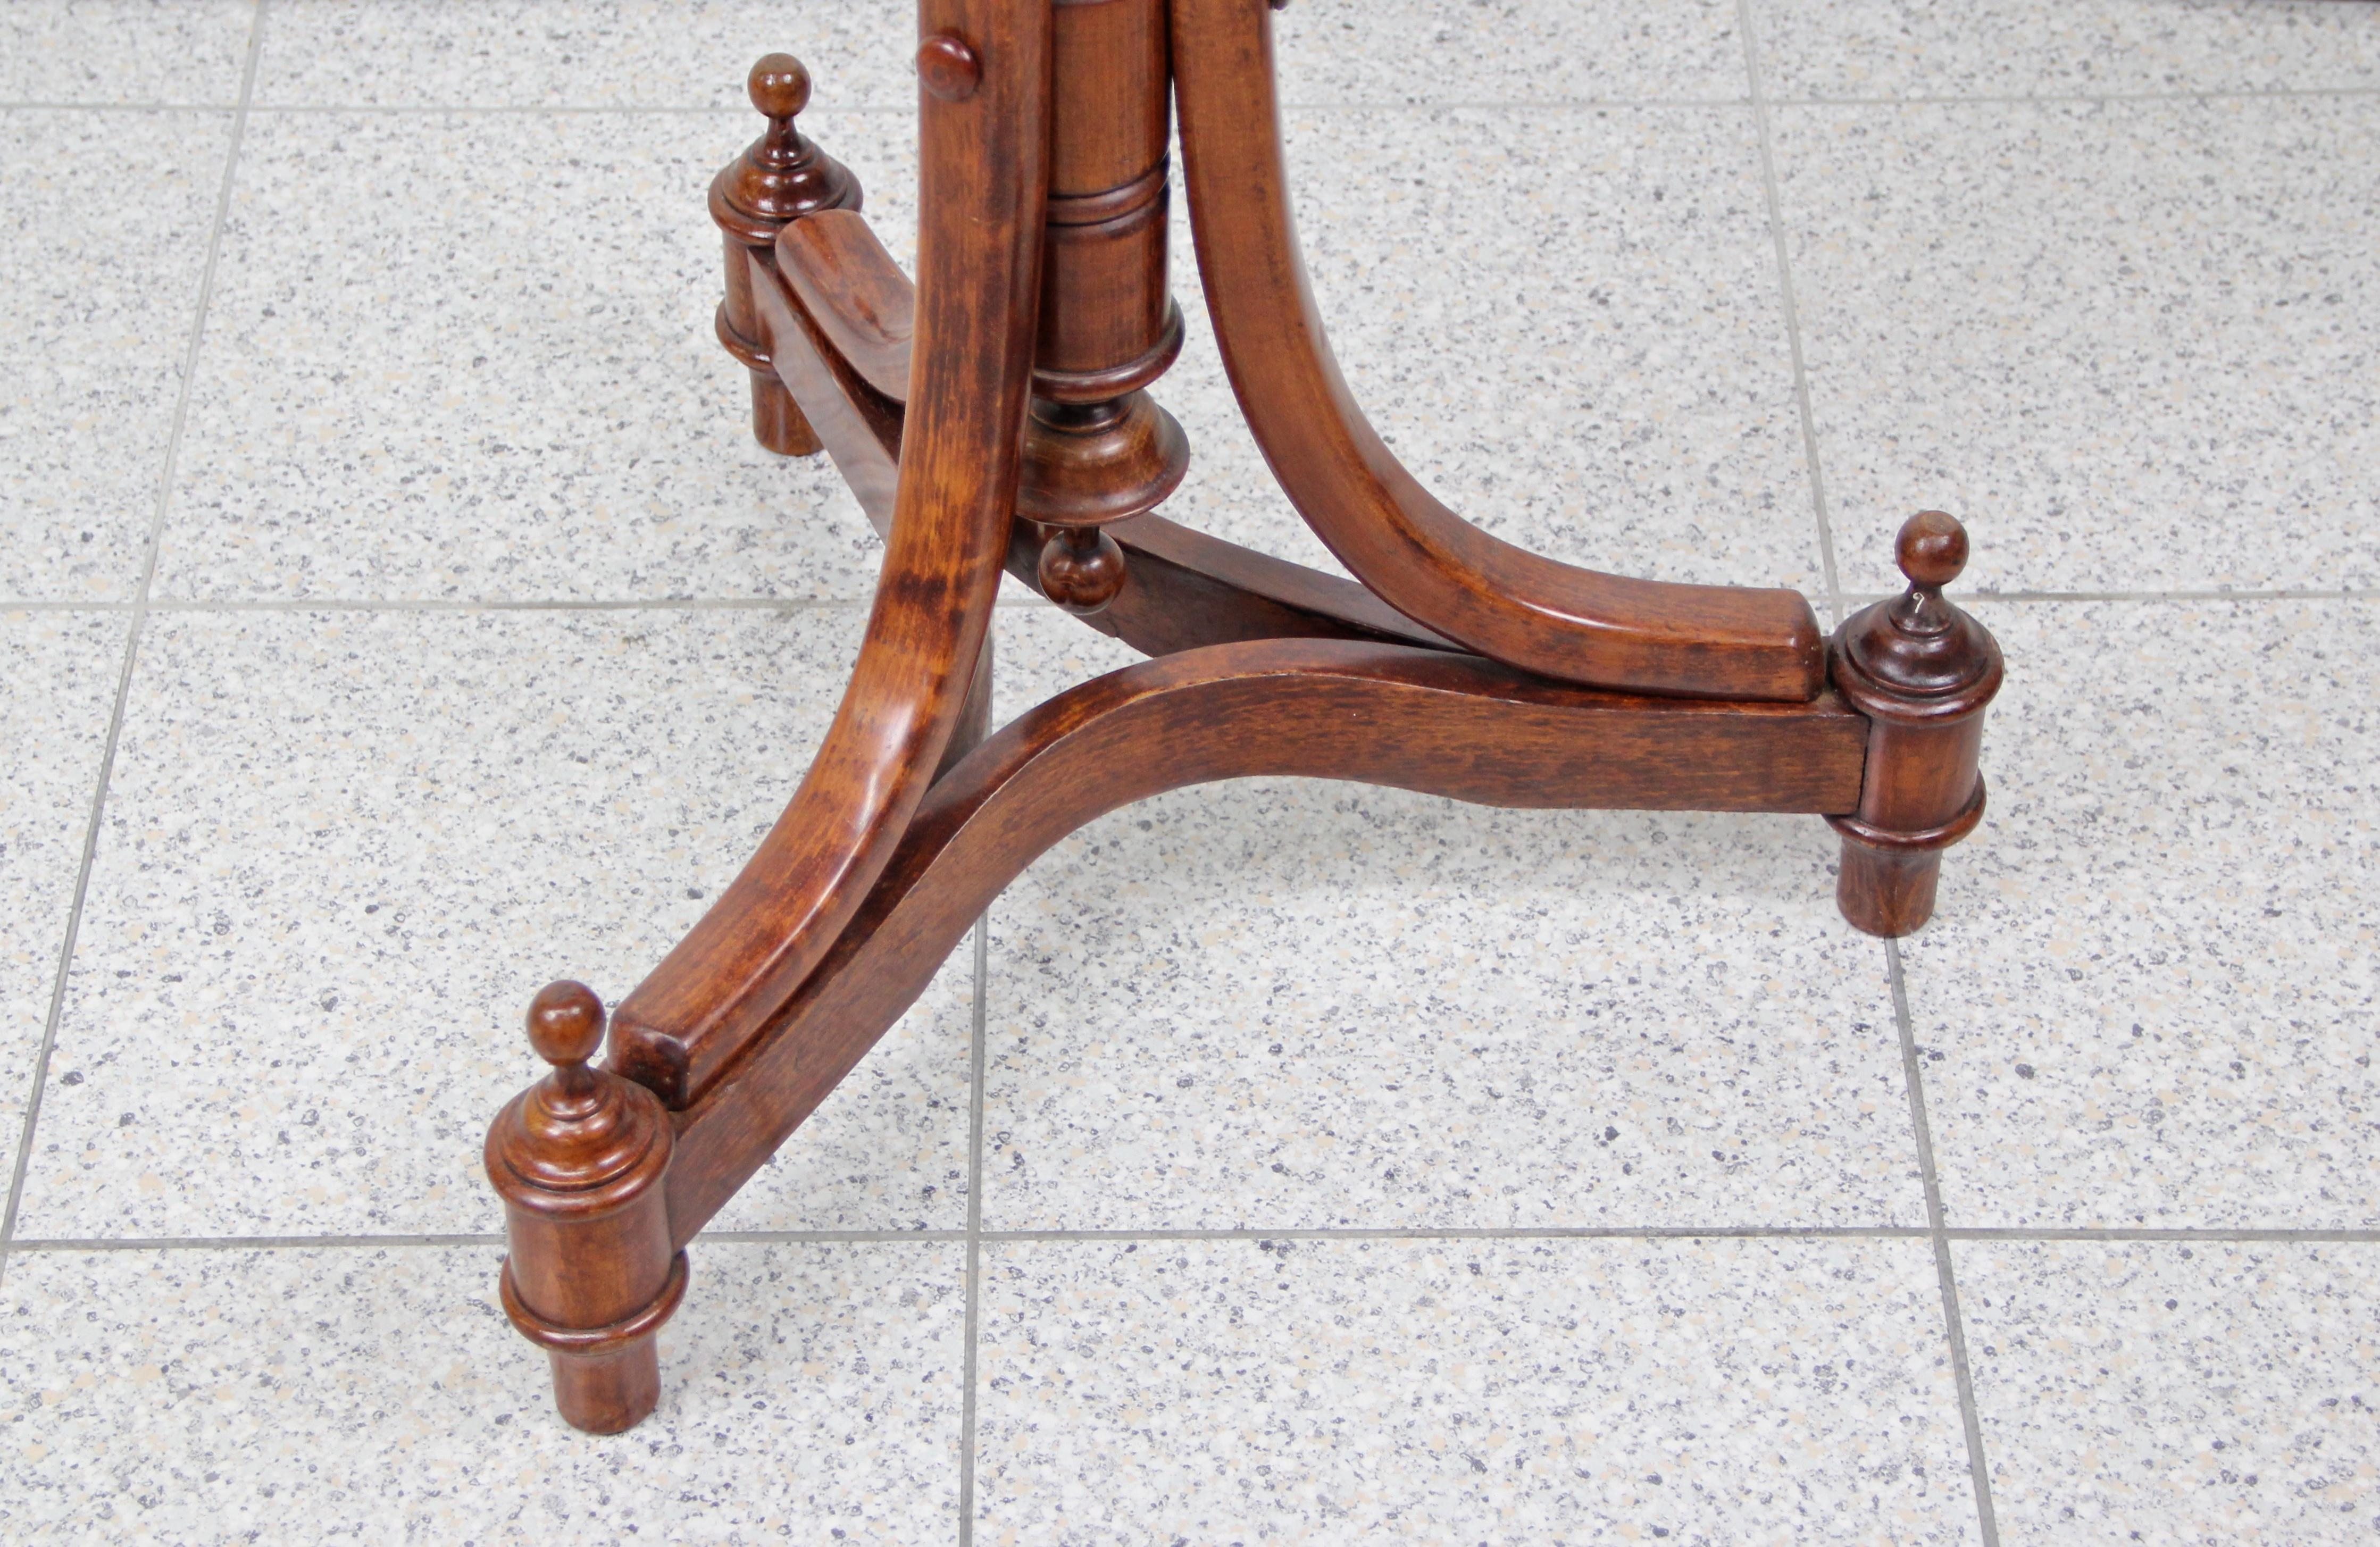 Beautiful shaped Art Nouveau bentwood coffee table or side table from the early 20th century in Austria, circa 1900. An absolute unique designed side table with lovely slender feet and an artfully worked base, showing a lot of small details. This